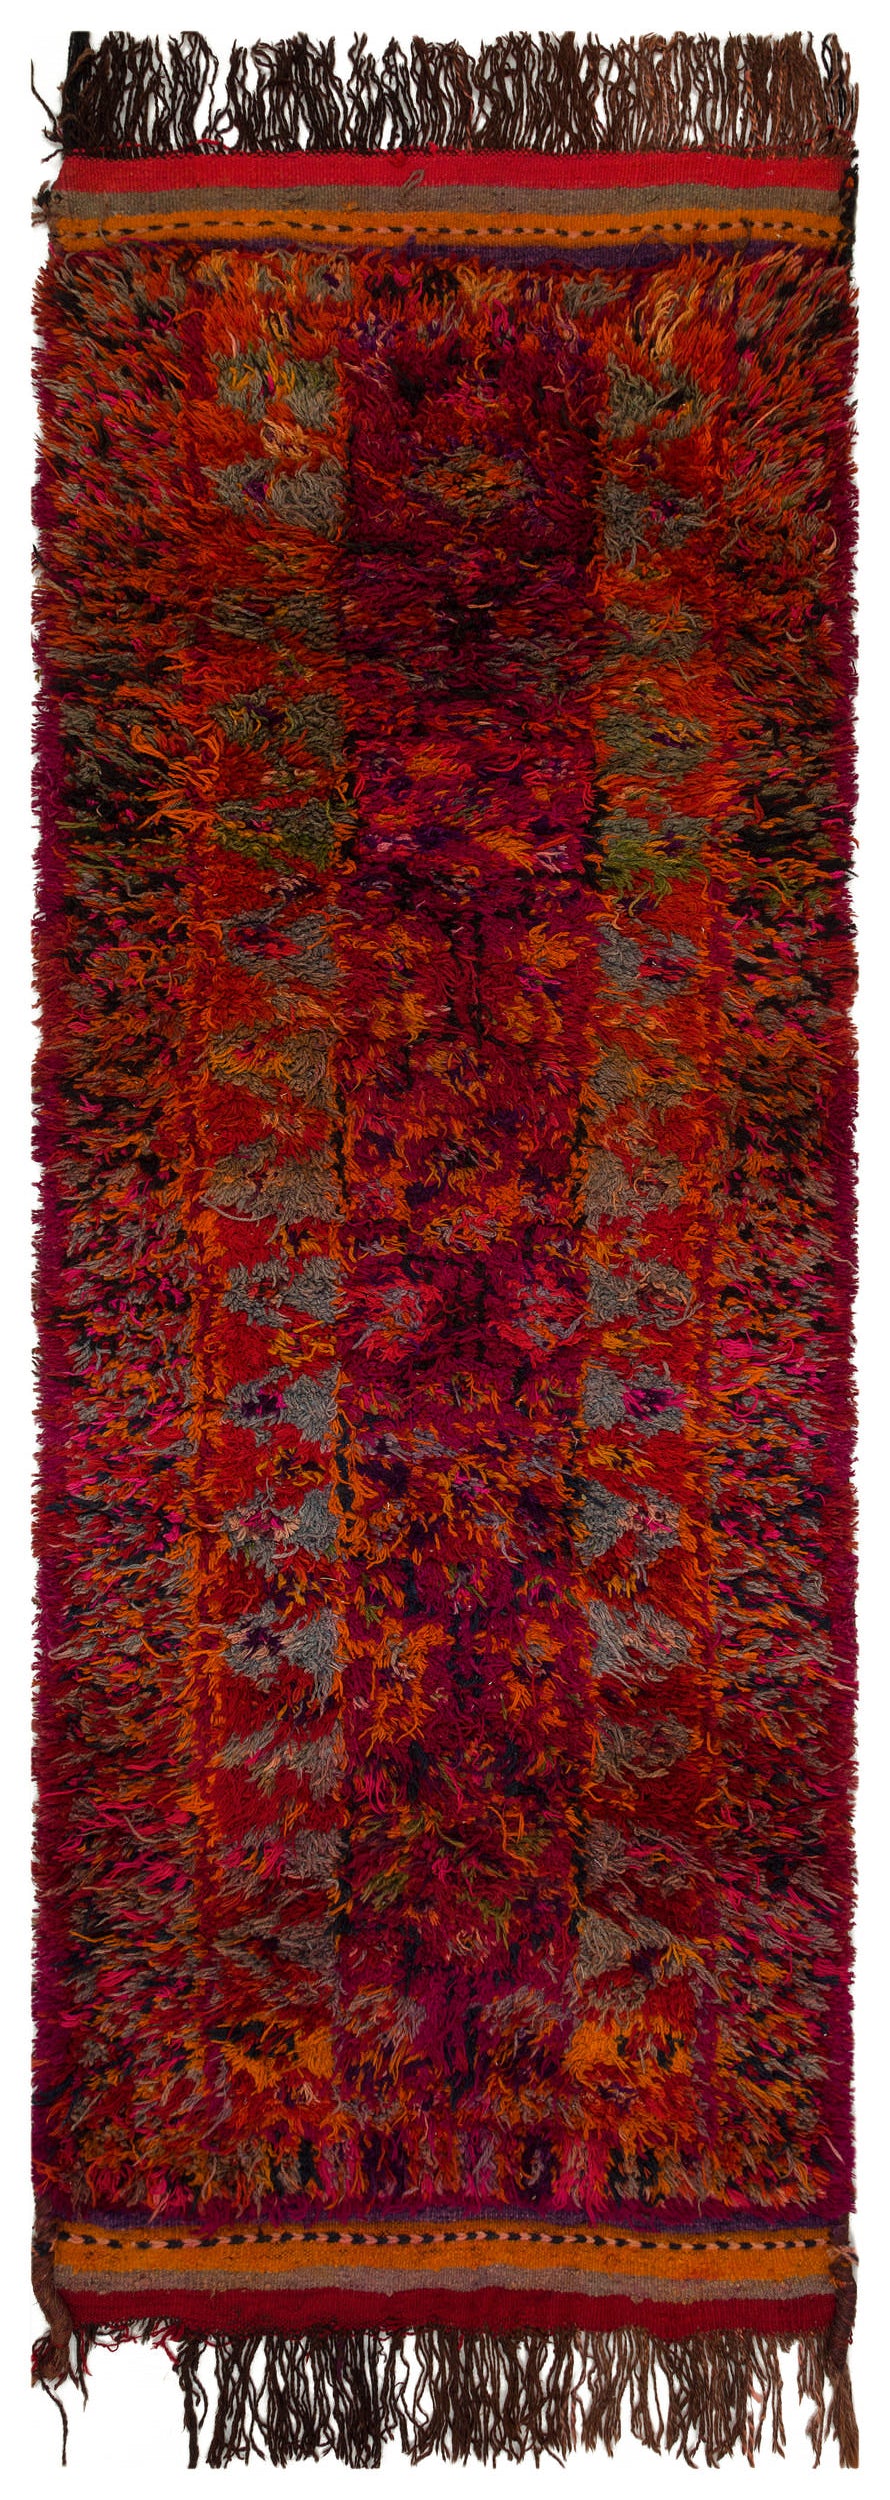 One-of-a-kind Hand Knotted Tulu Runner 3'7'' x 9'10'' ft 110 x 300 cm